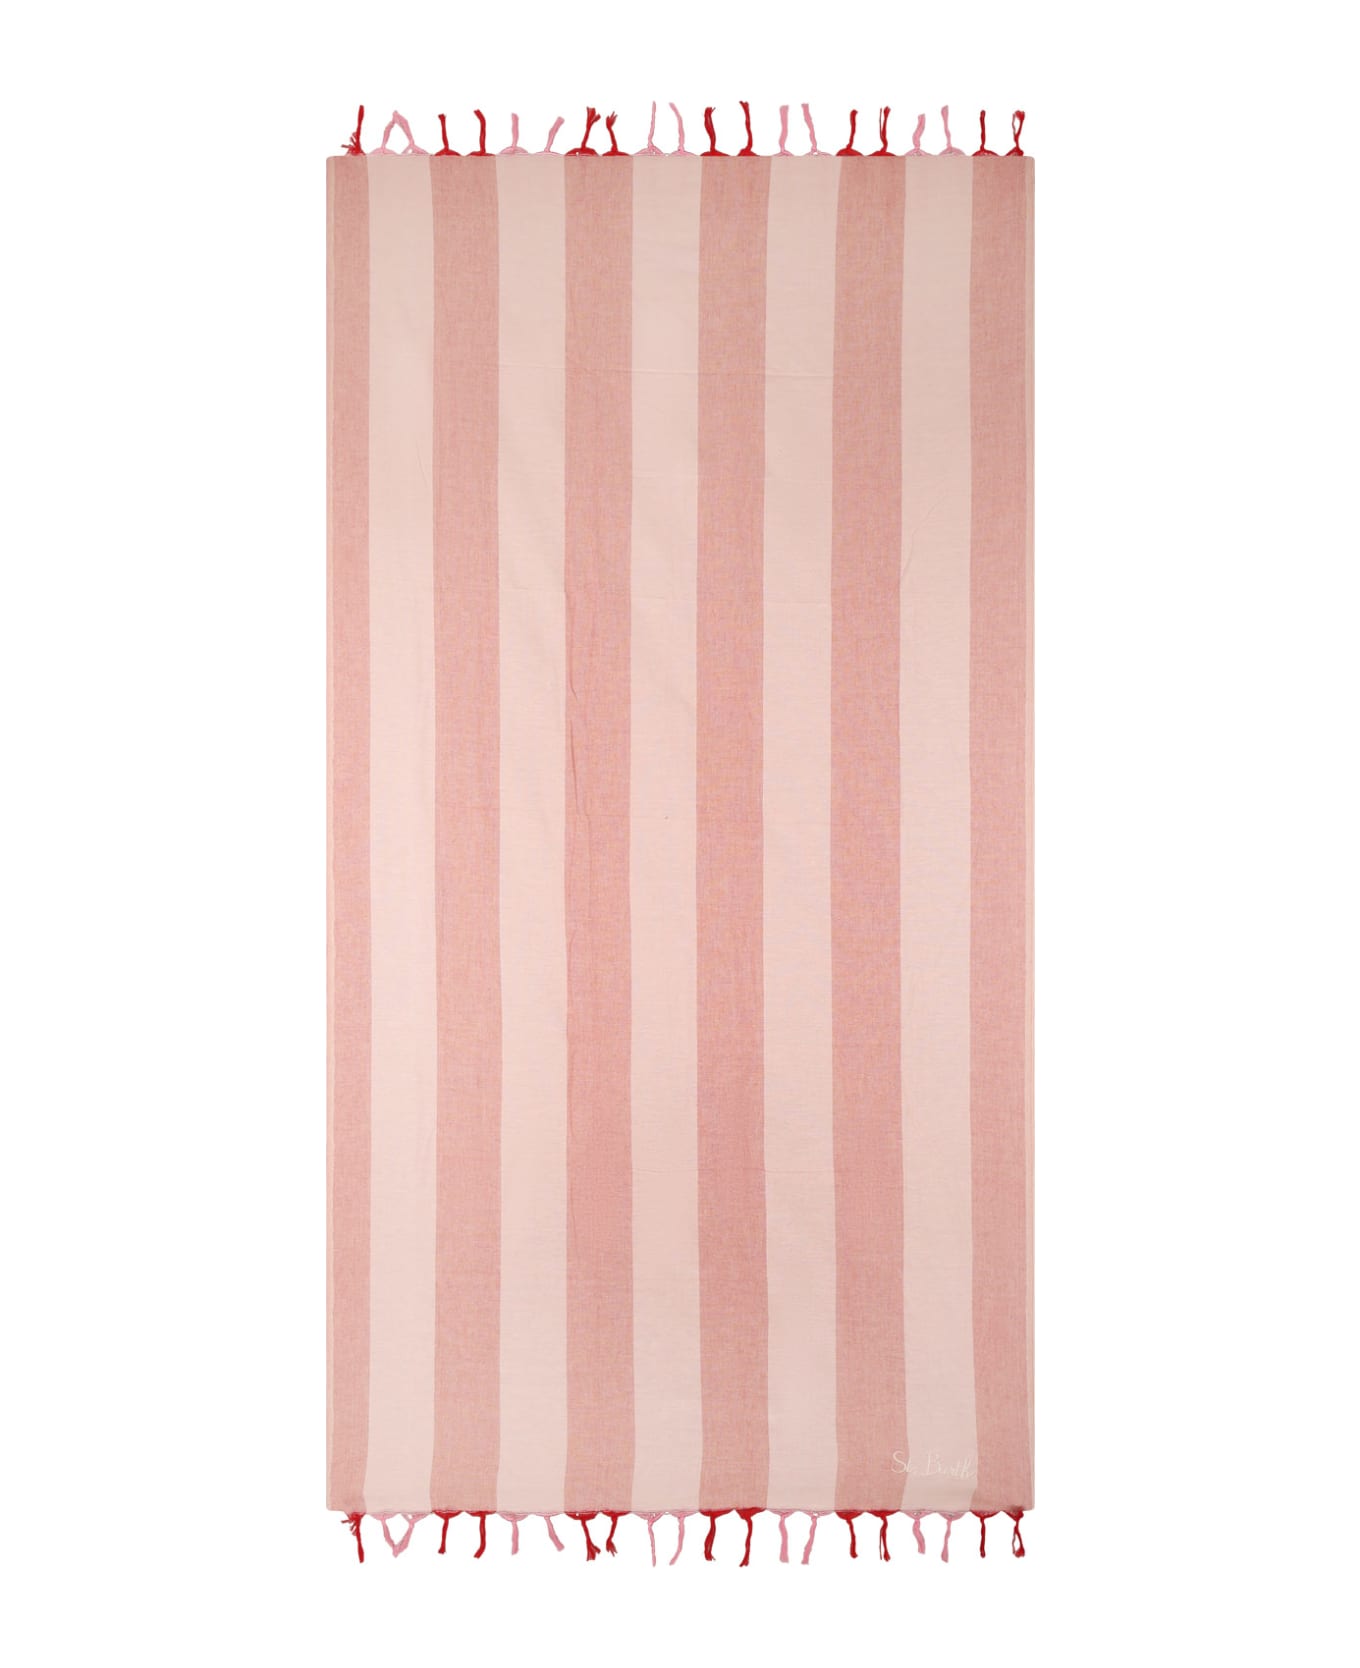 MC2 Saint Barth Pink Beach Towel For Girl With Logo - Multicolor アクセサリー＆ギフト